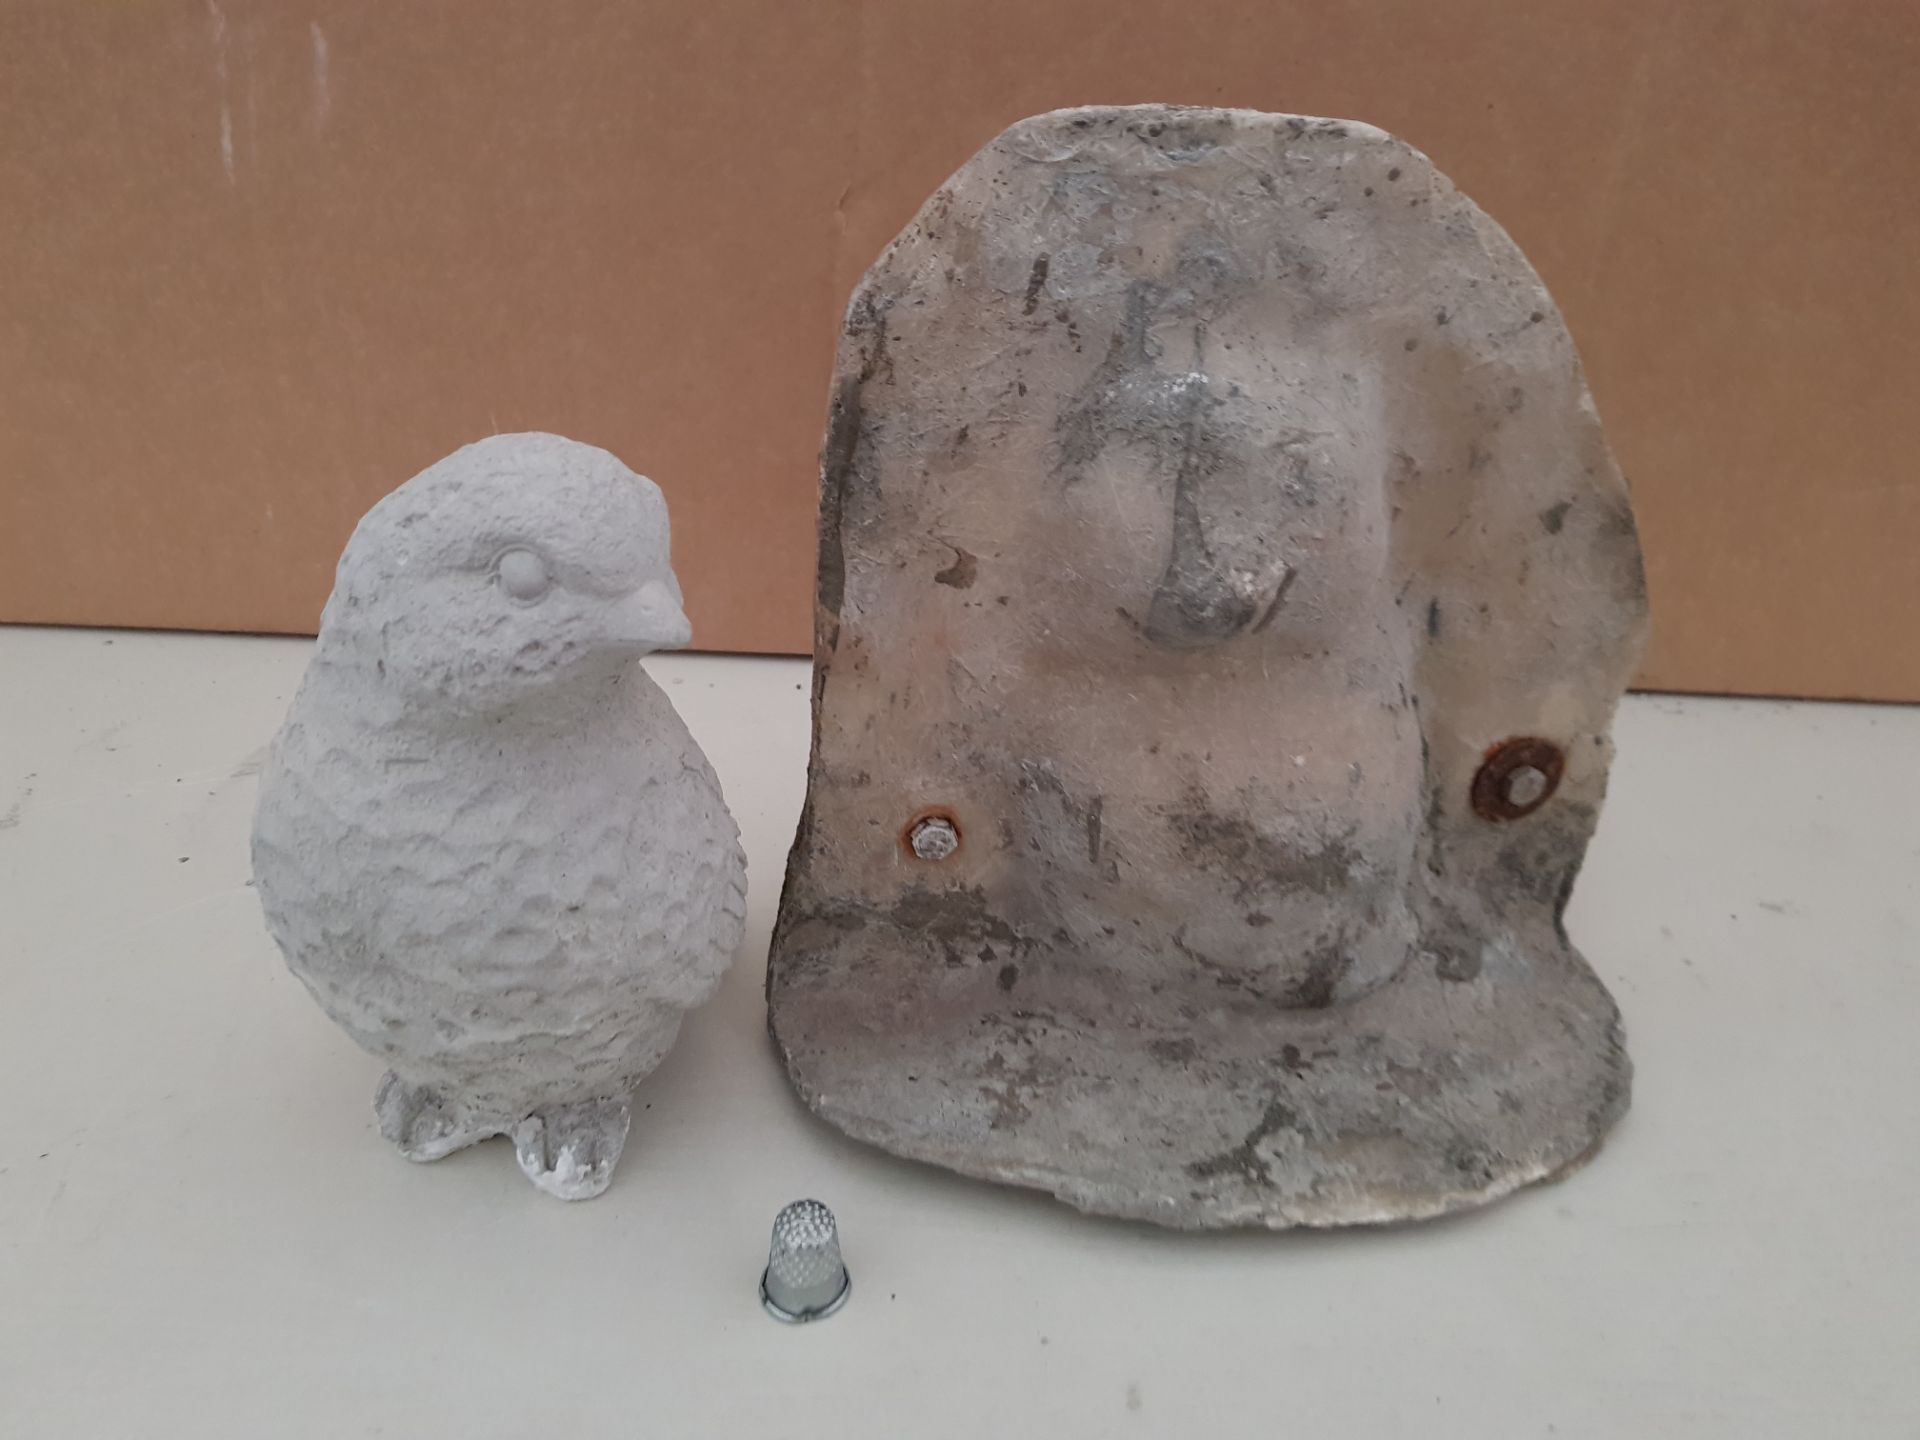 20 CM LOVE BIRD ( OLLIE) MASTER CAST WITH LATEX SLIP & FIBRE GLASS MOULD (FOR CASTING PRODUCT TO